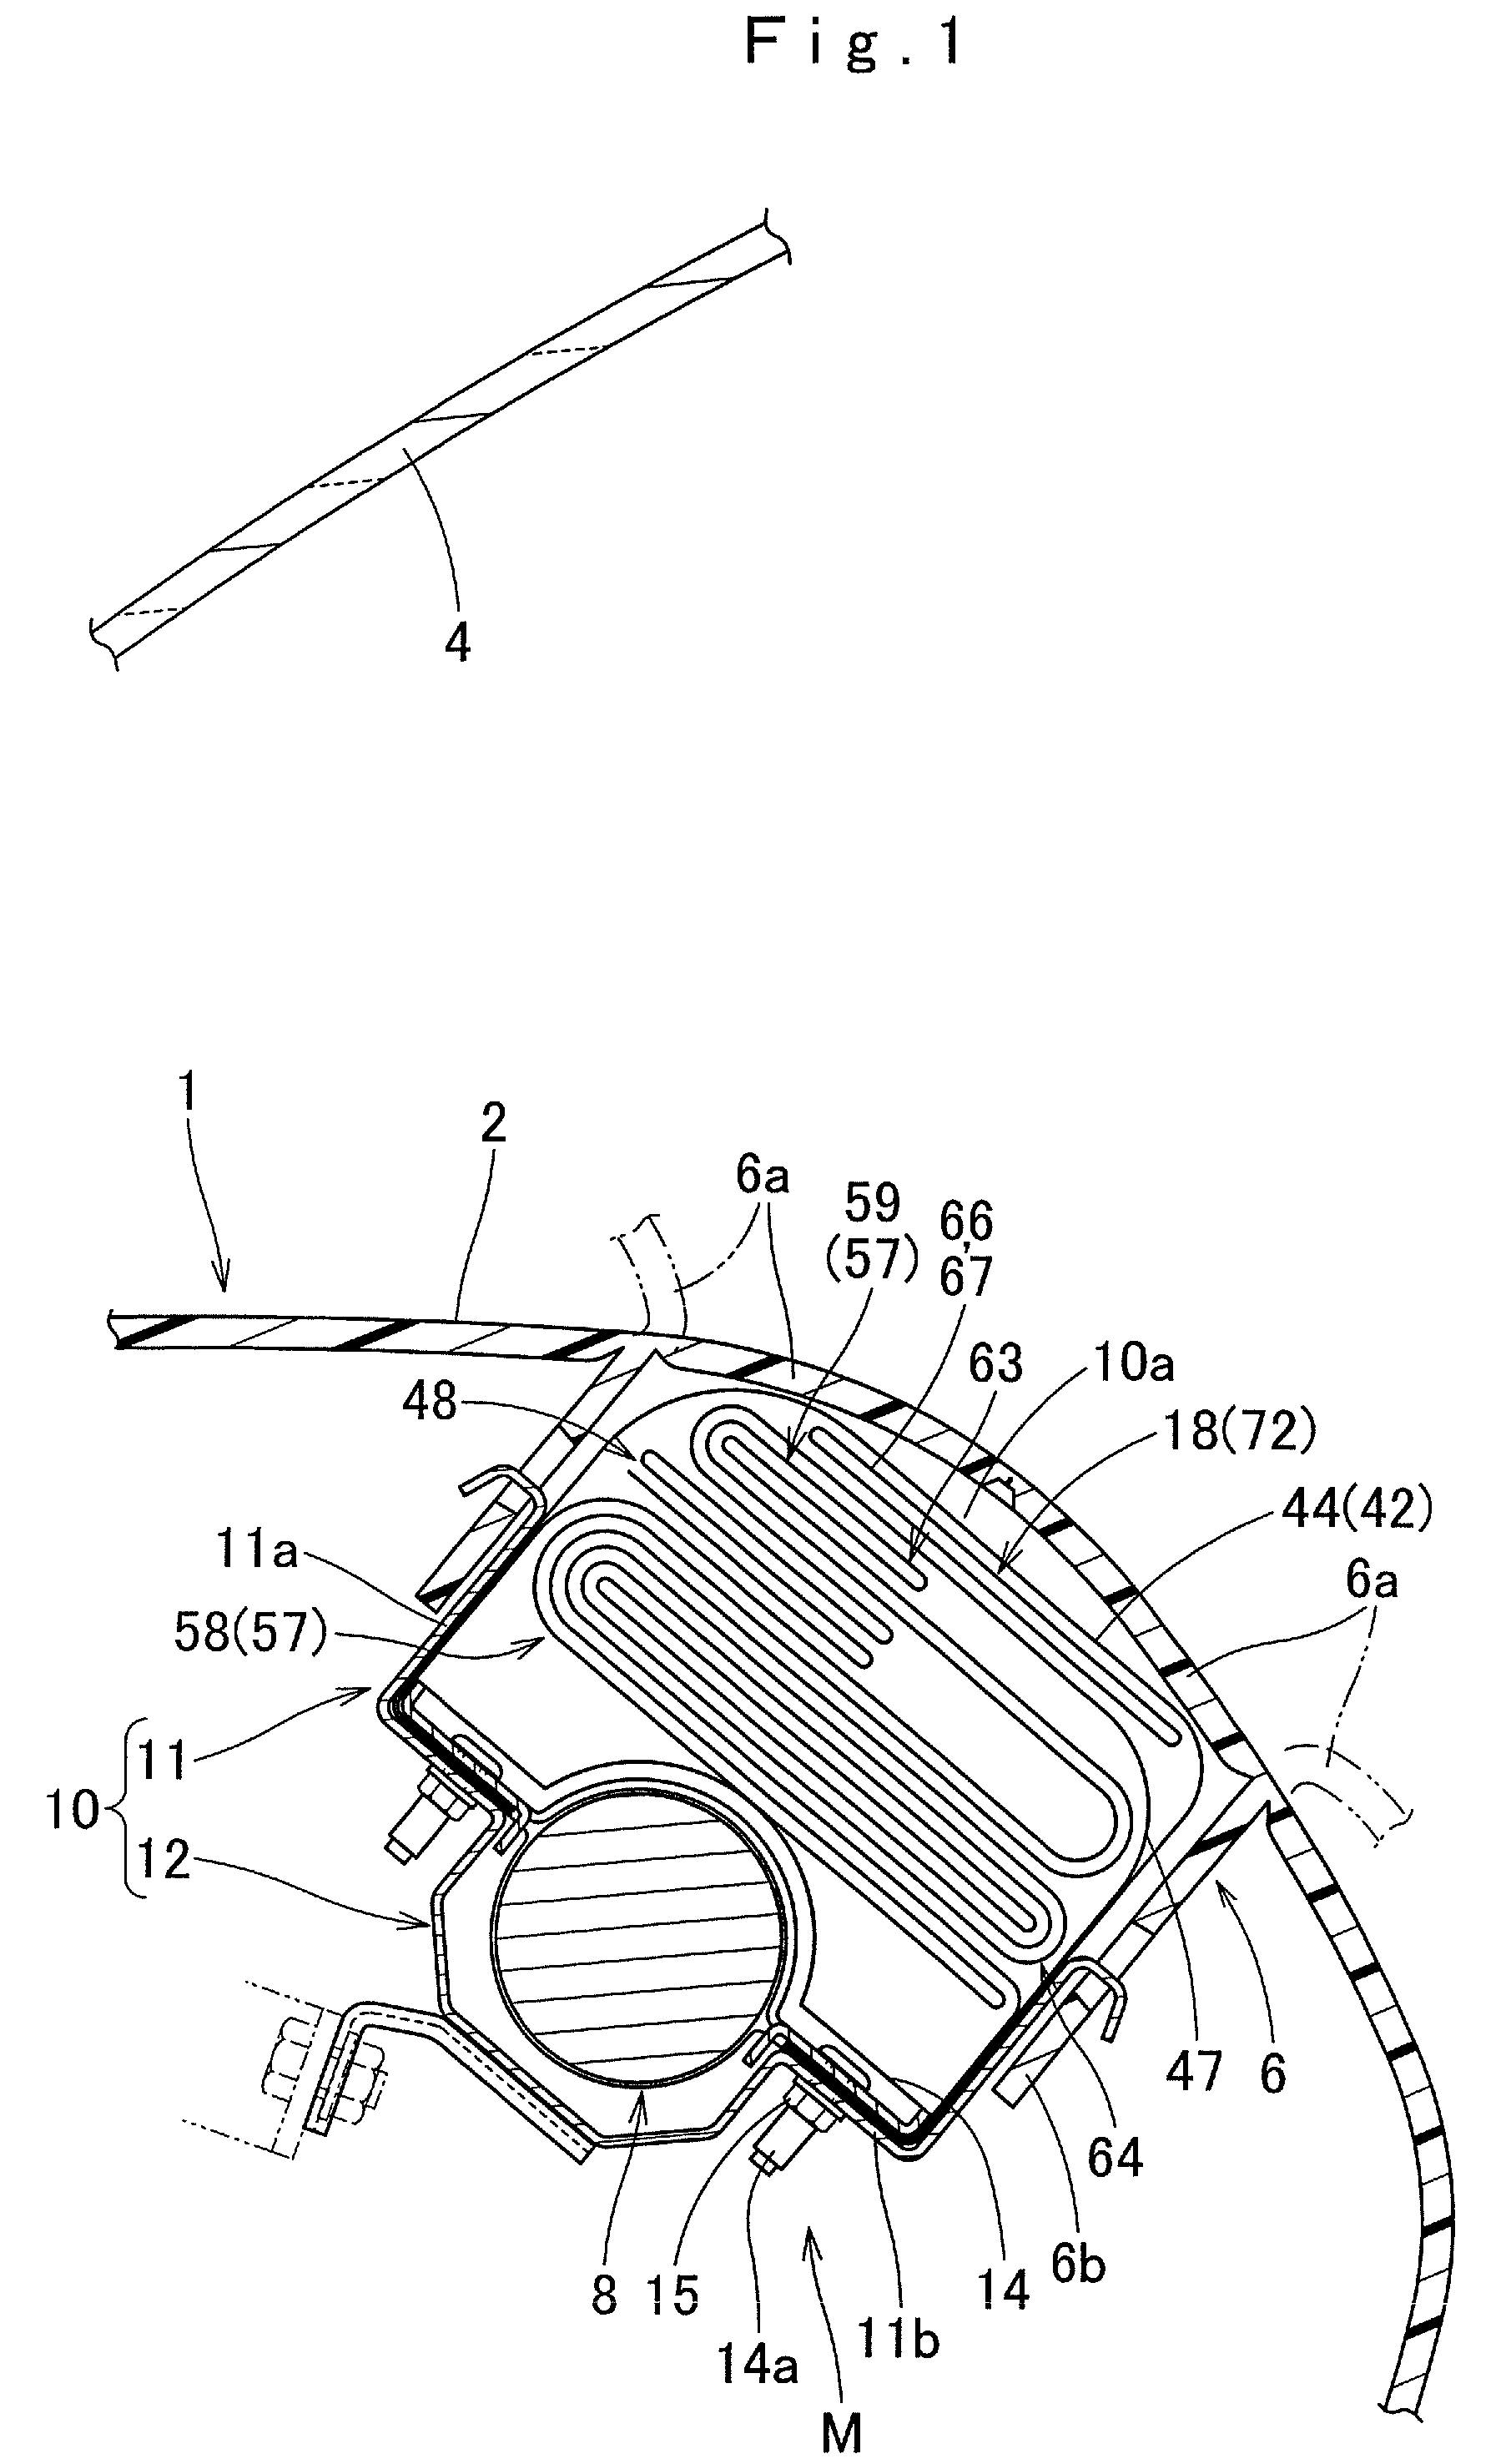 Airbag apparatus for a front passenger's seat